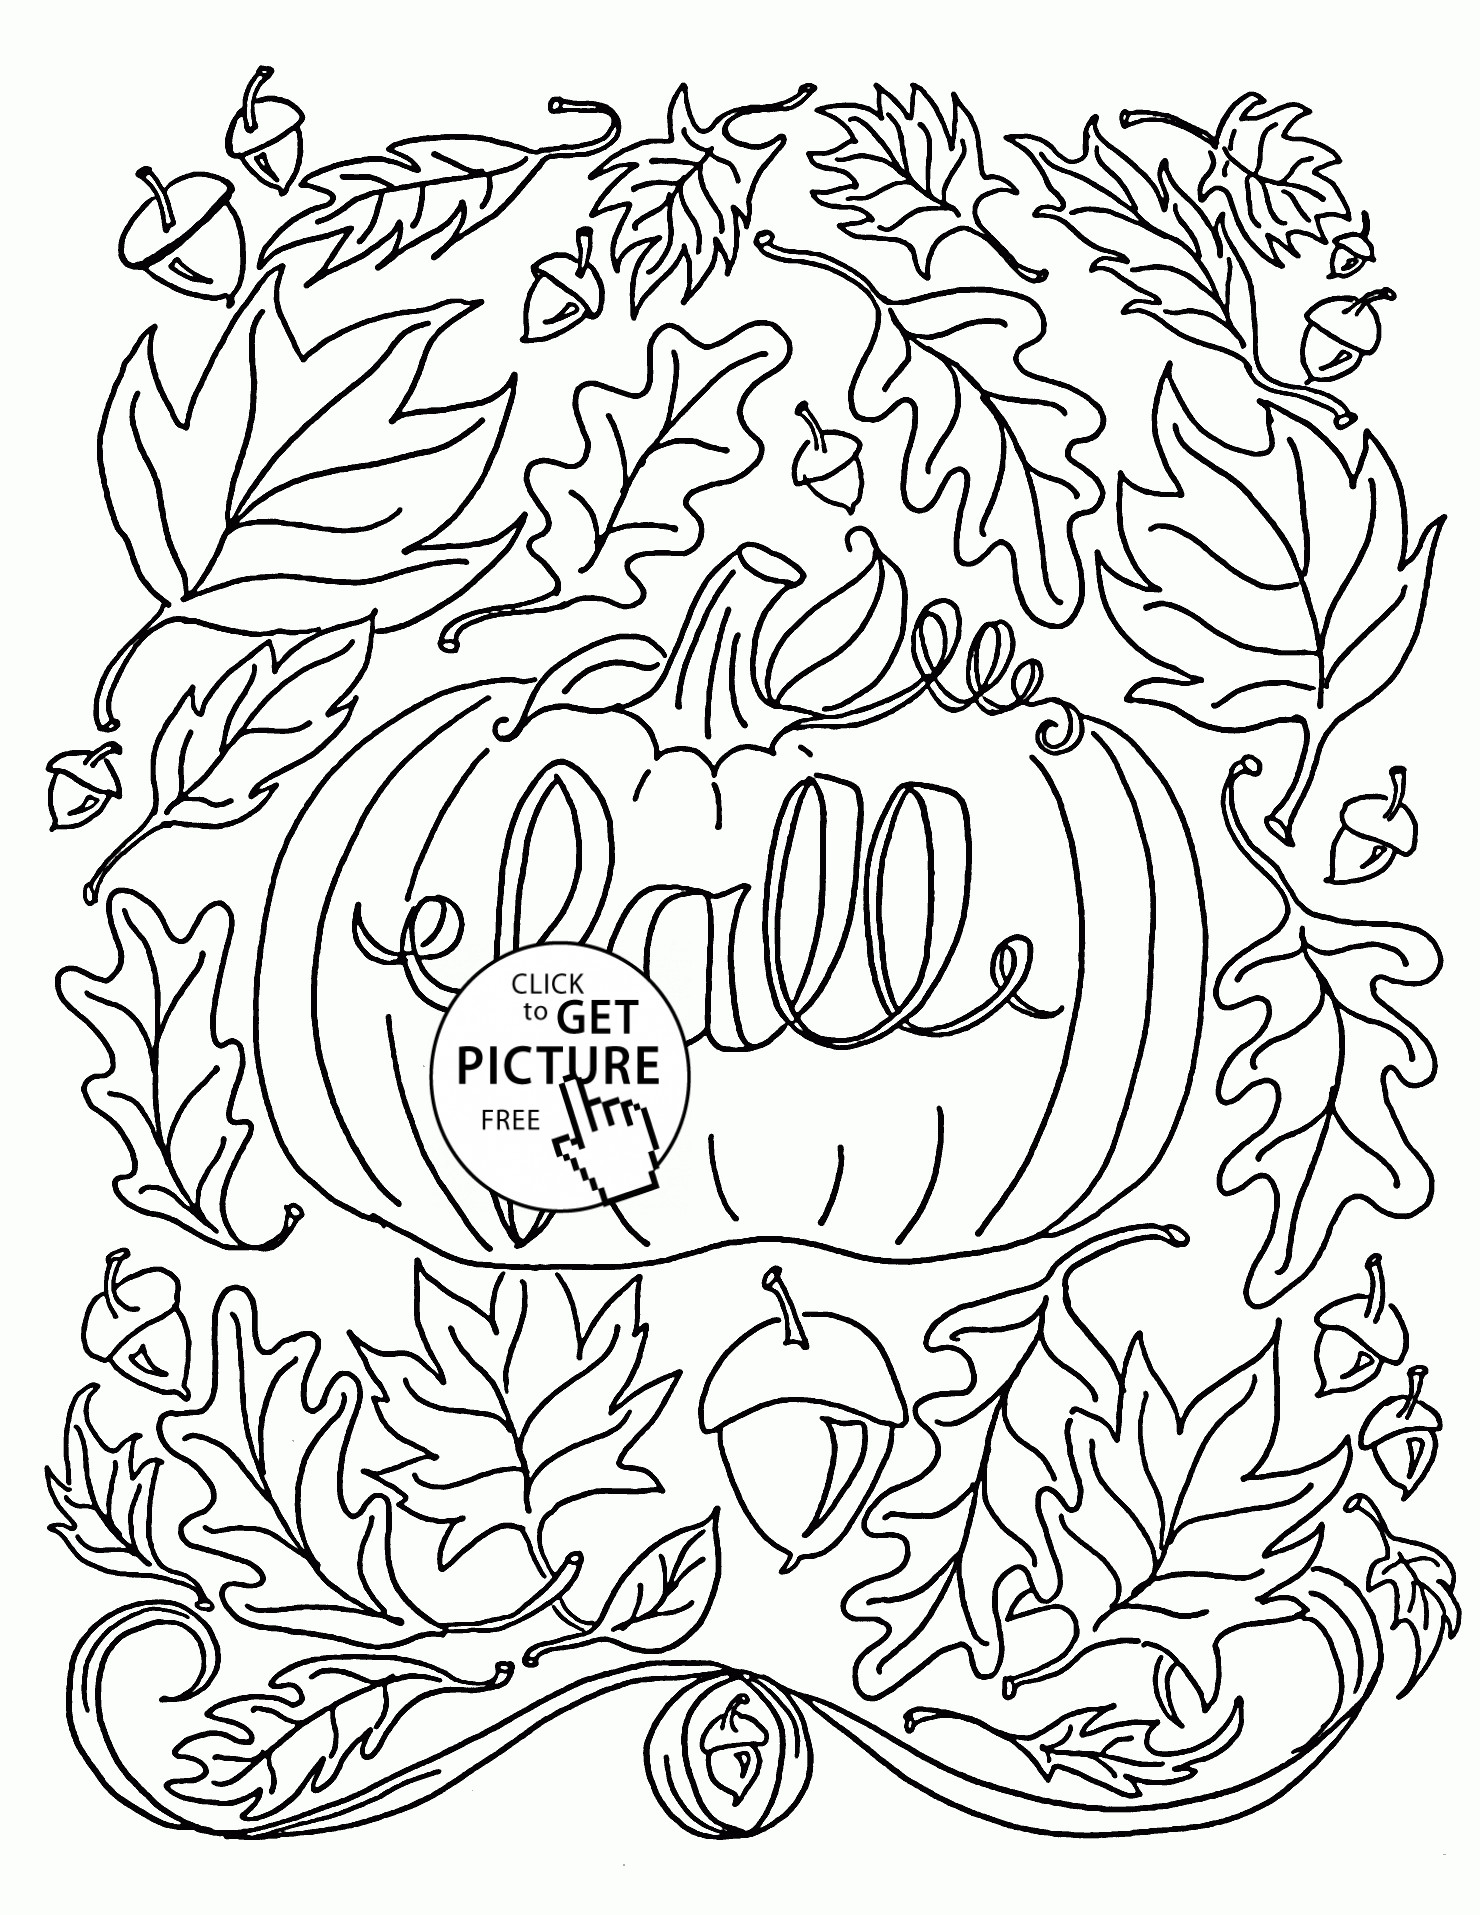 Free Fall Printable Coloring Sheets For Kids
 It is Fall coloring pages for kids autumn printables free